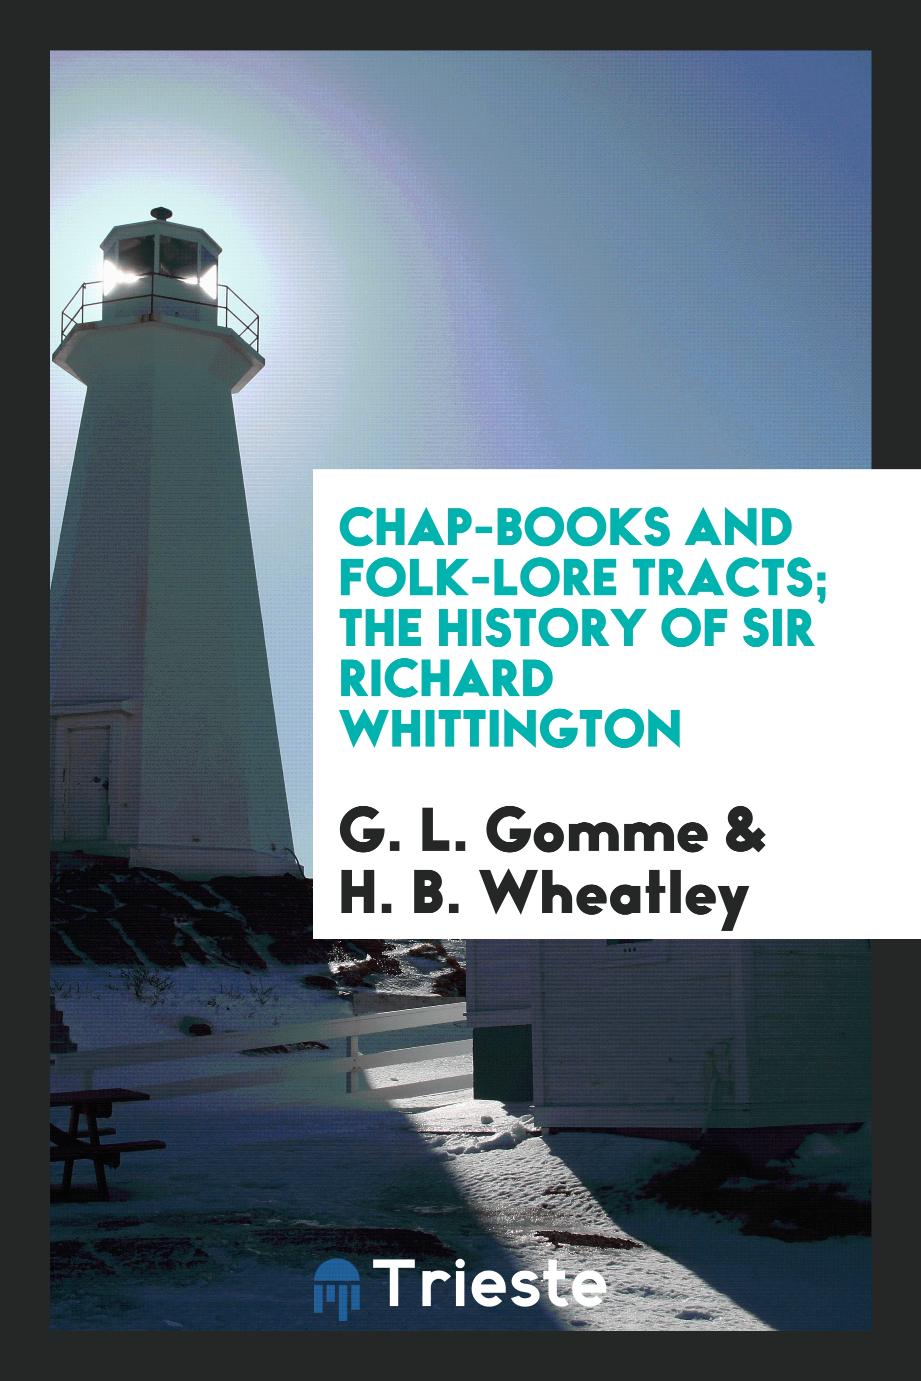 Chap-books and folk-lore tracts; The history of sir Richard Whittington